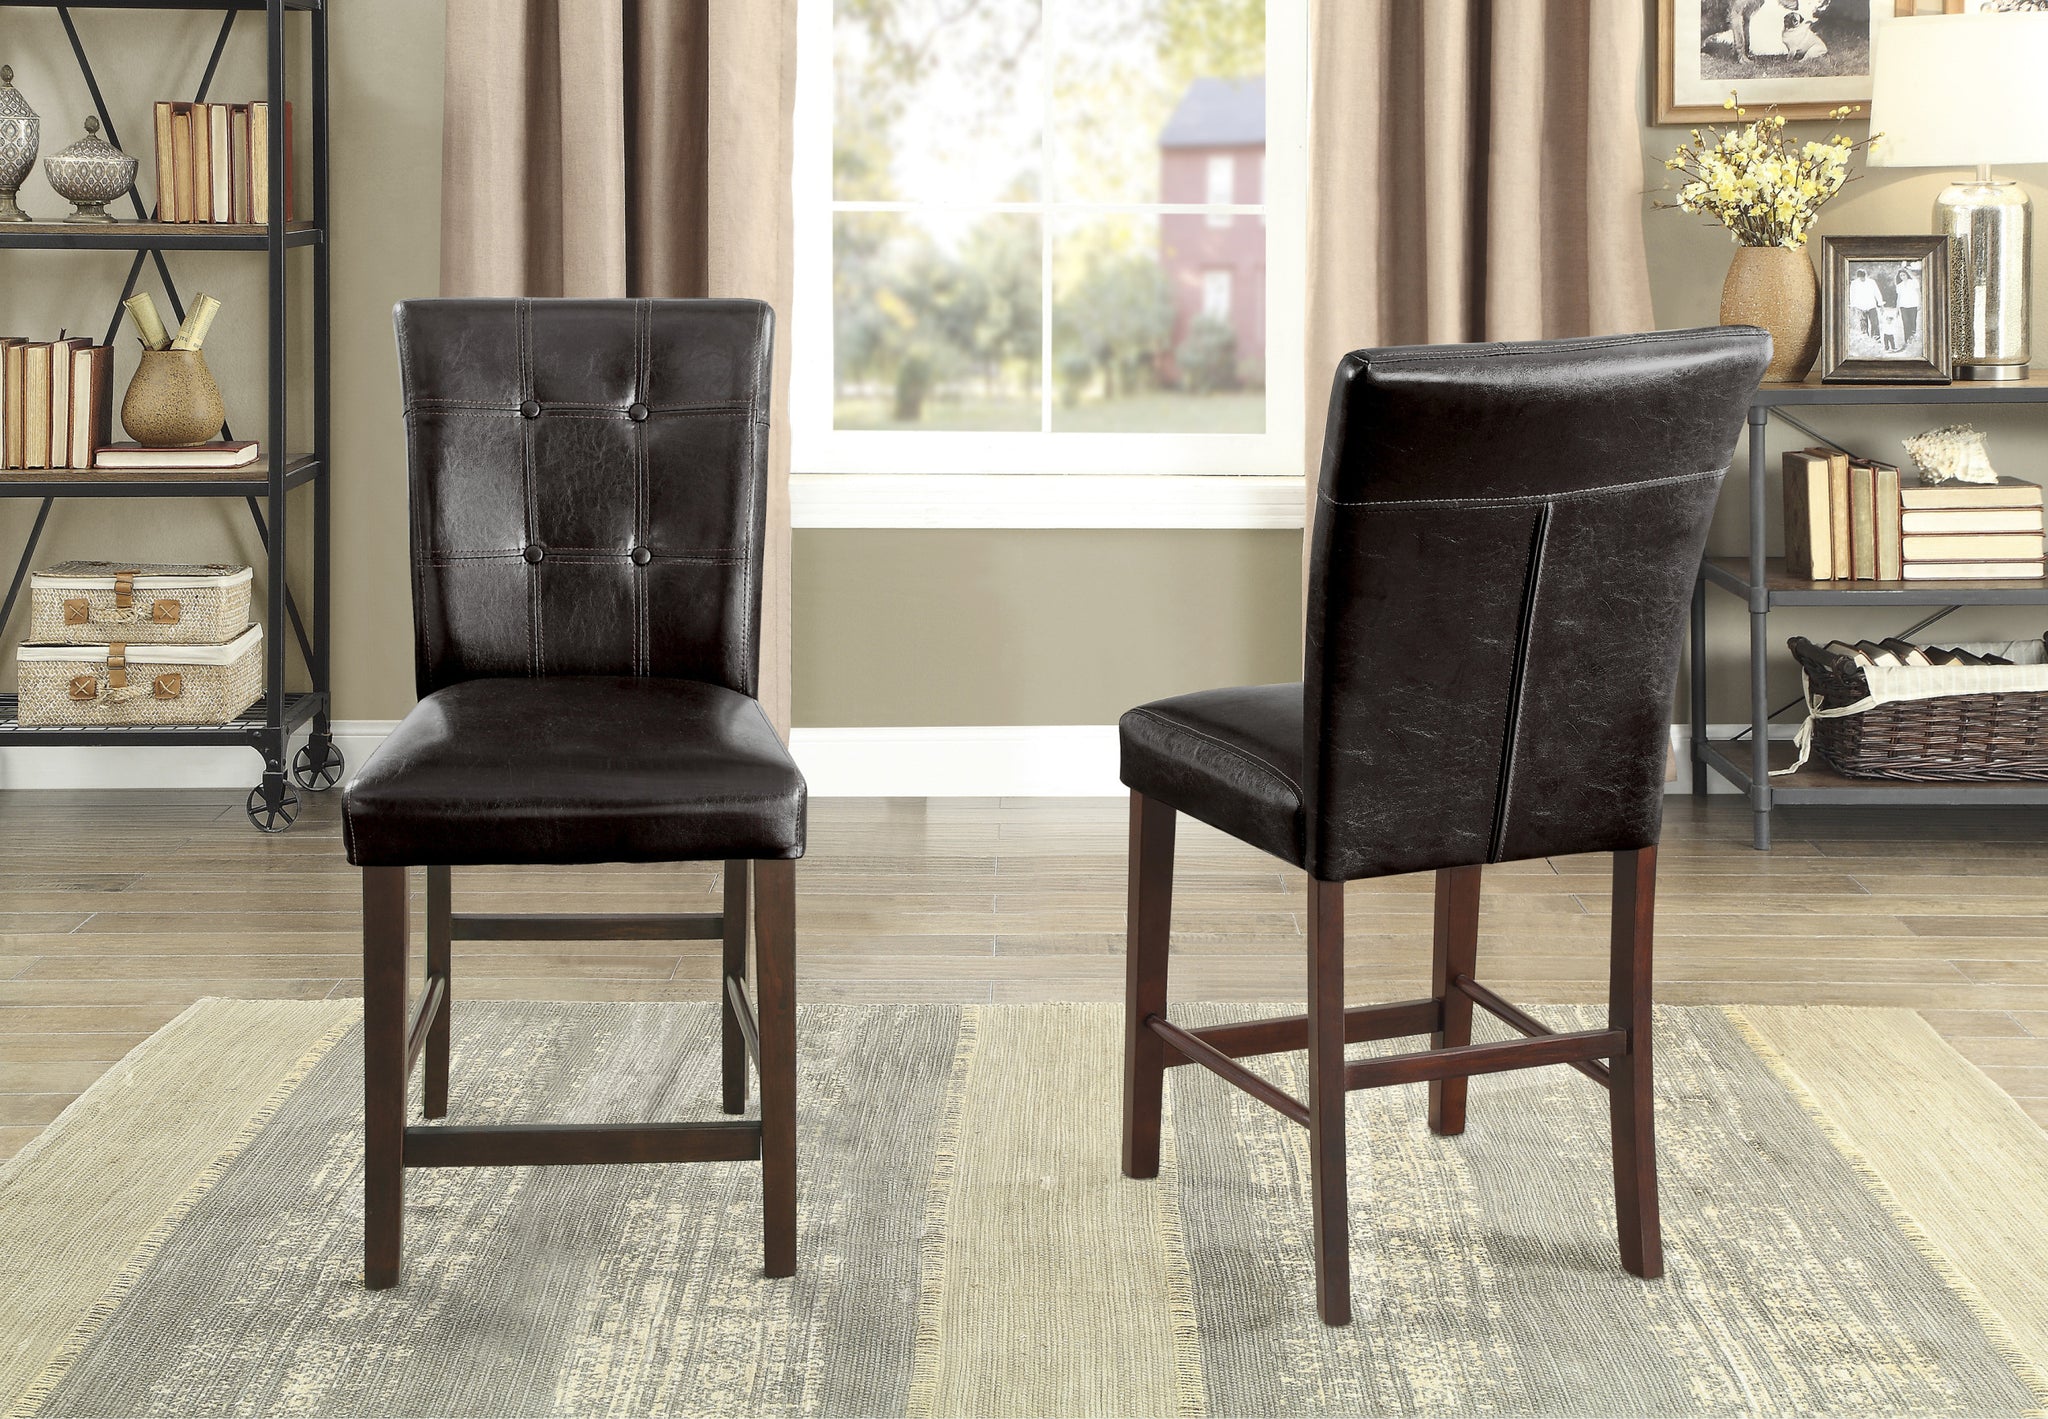 Espresso Finish 2pc Set Counter Height Chairs Faux